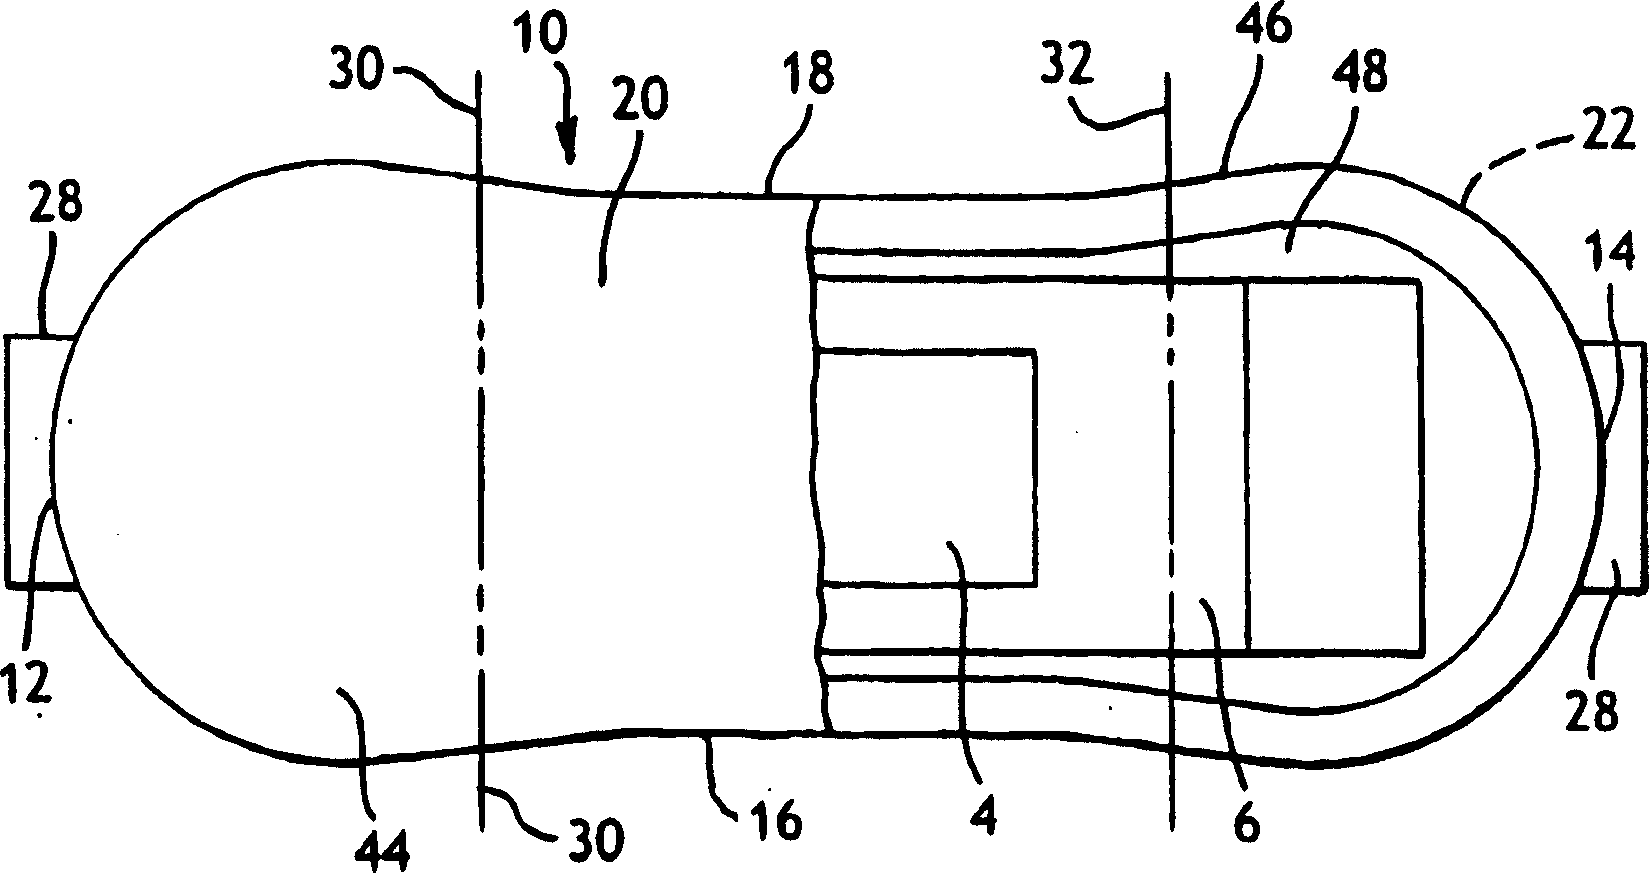 Wrapper component for personal care articles having a sensory cue for opening